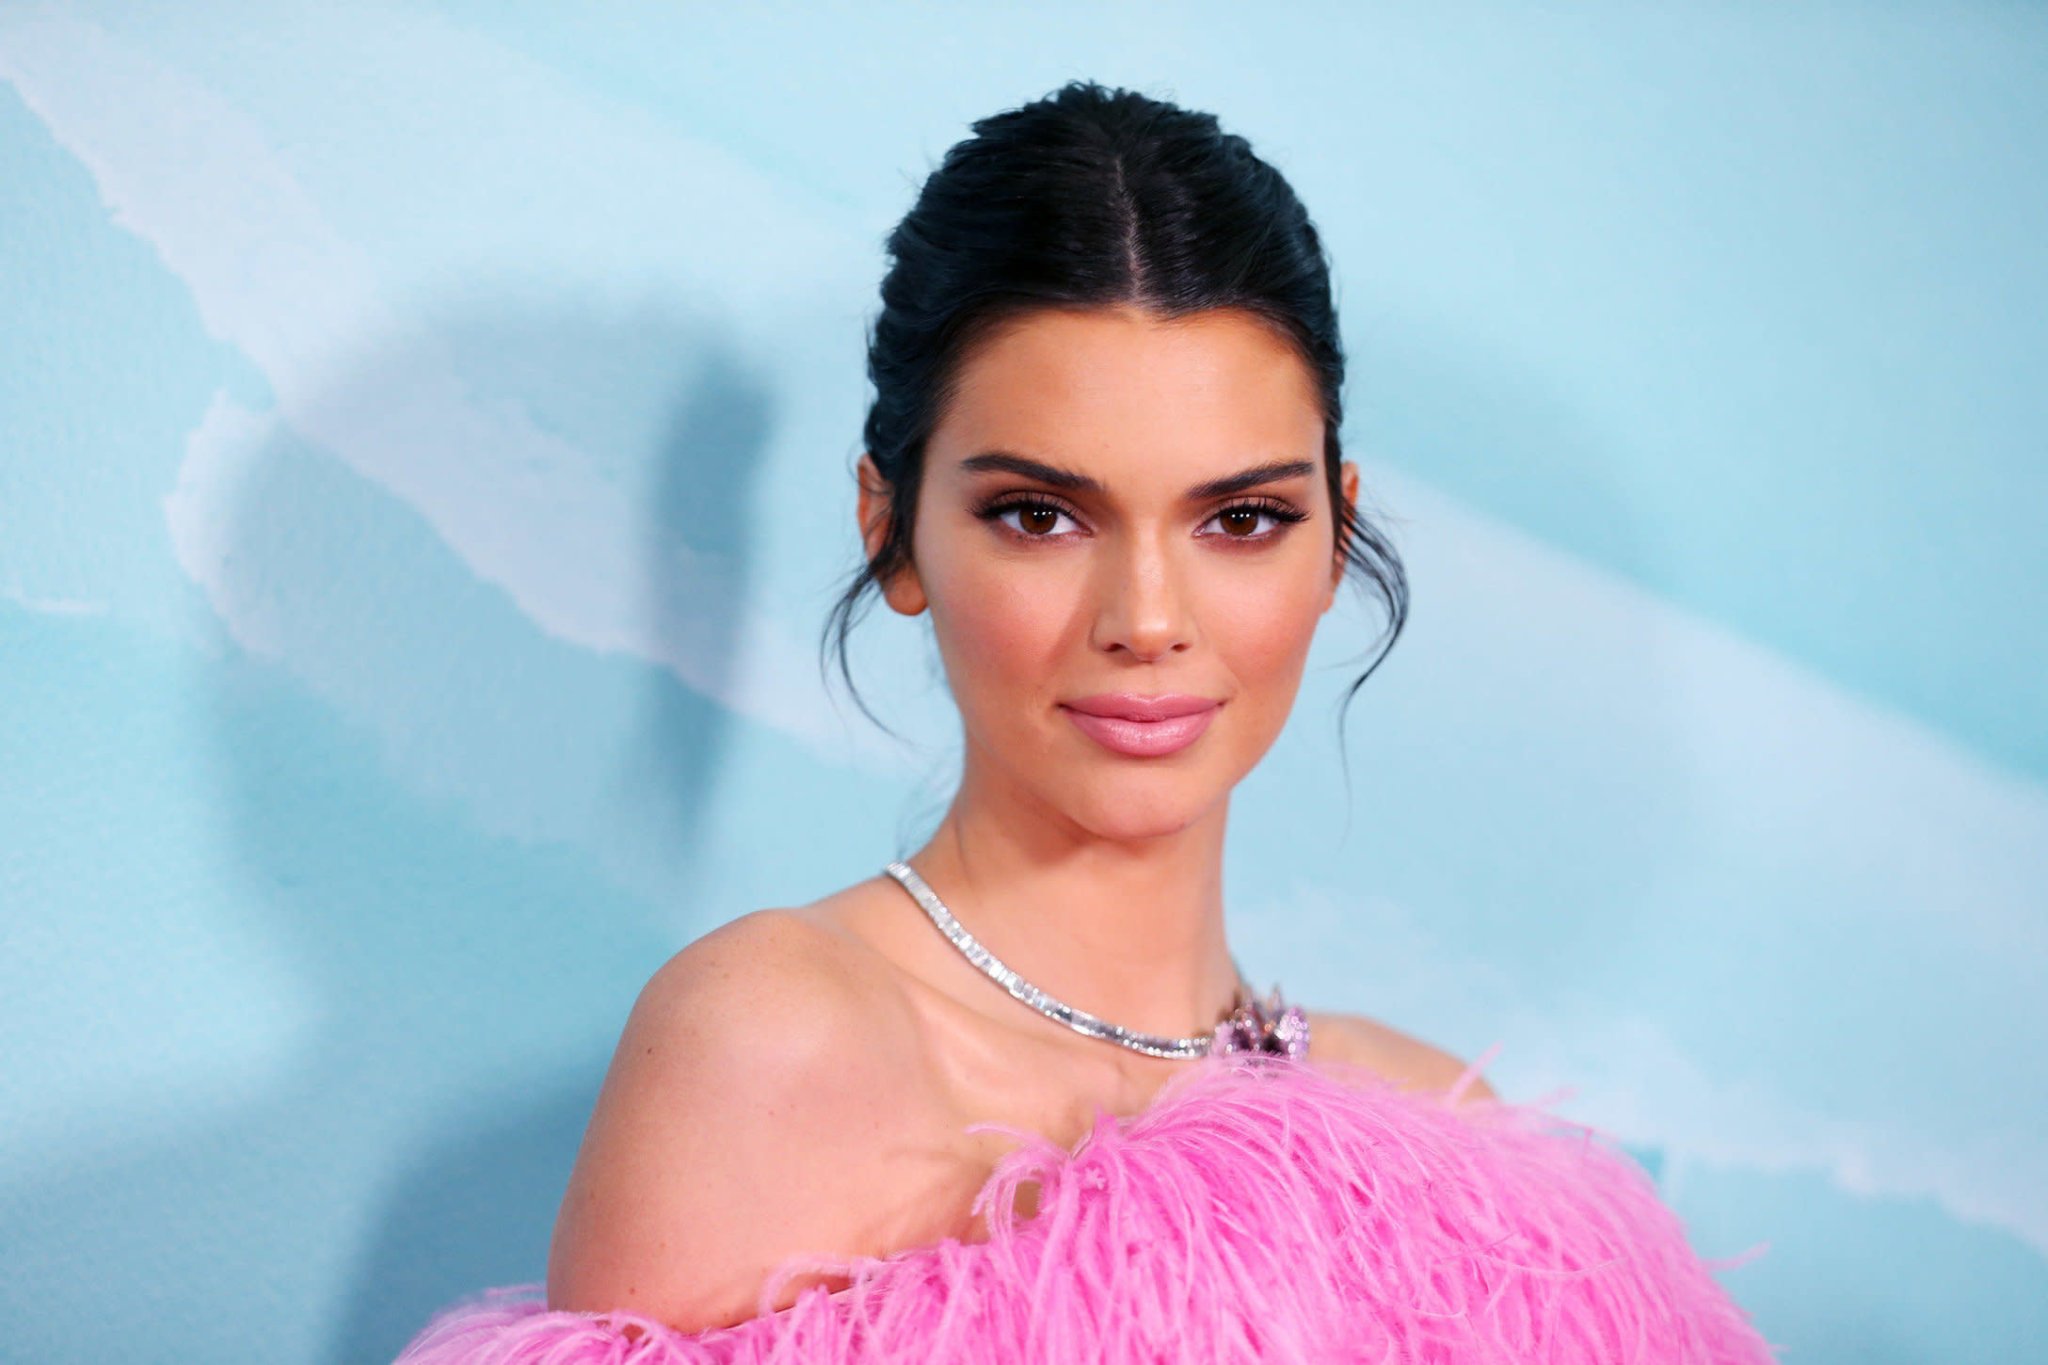 Kendall Jenner Finally Addresses the Controversial Dress She Wore to BFF’s Wedding